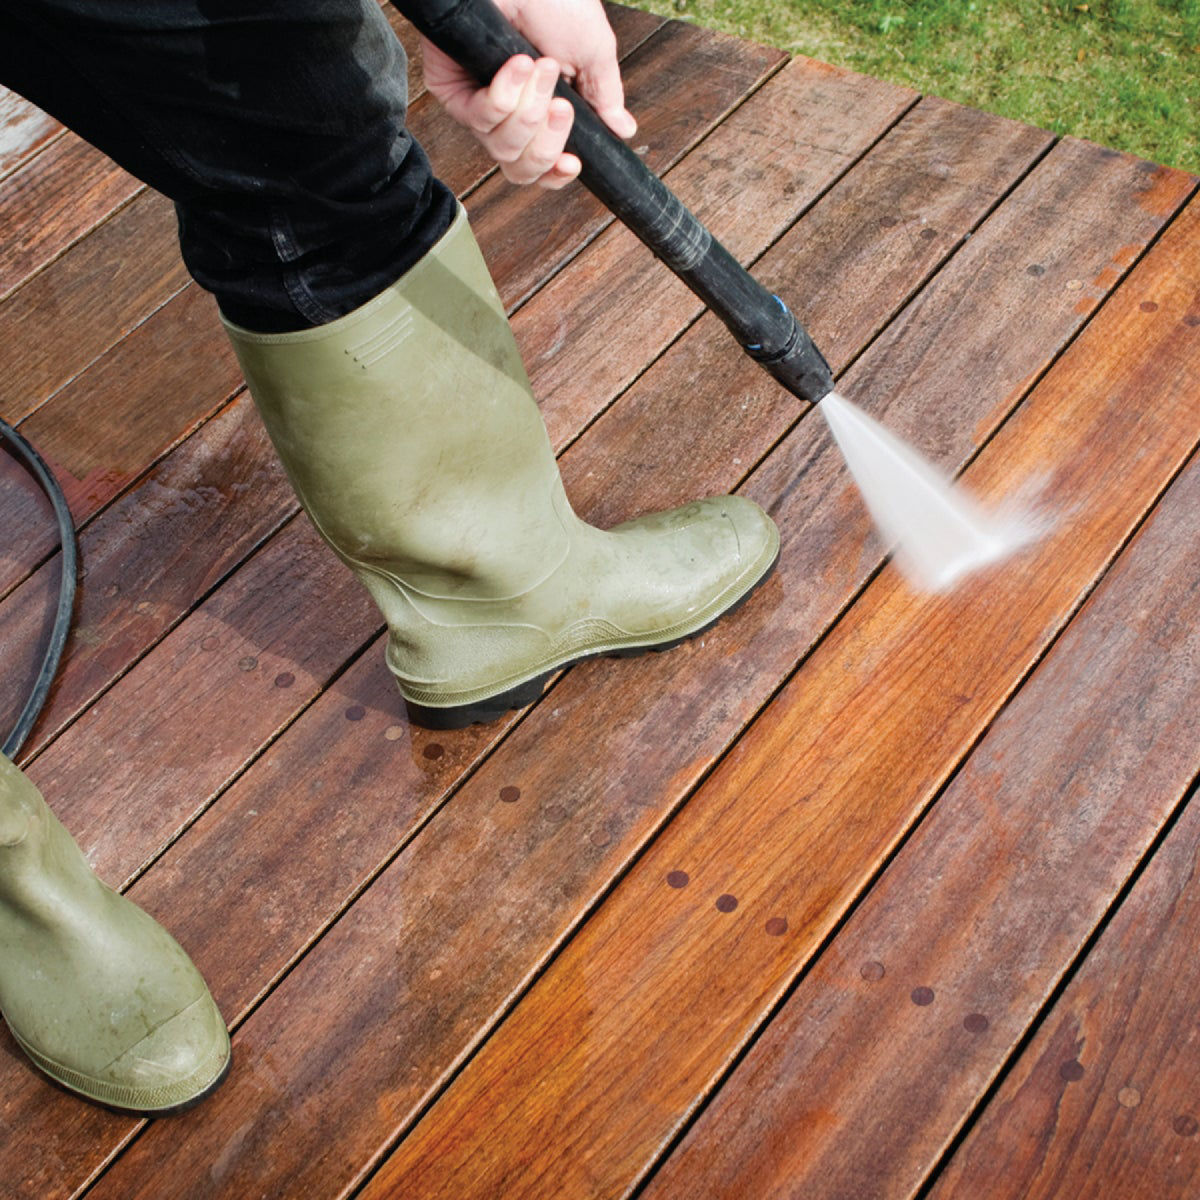 Low-pressure peroxide wash to keep the bottoms of those decks clean.